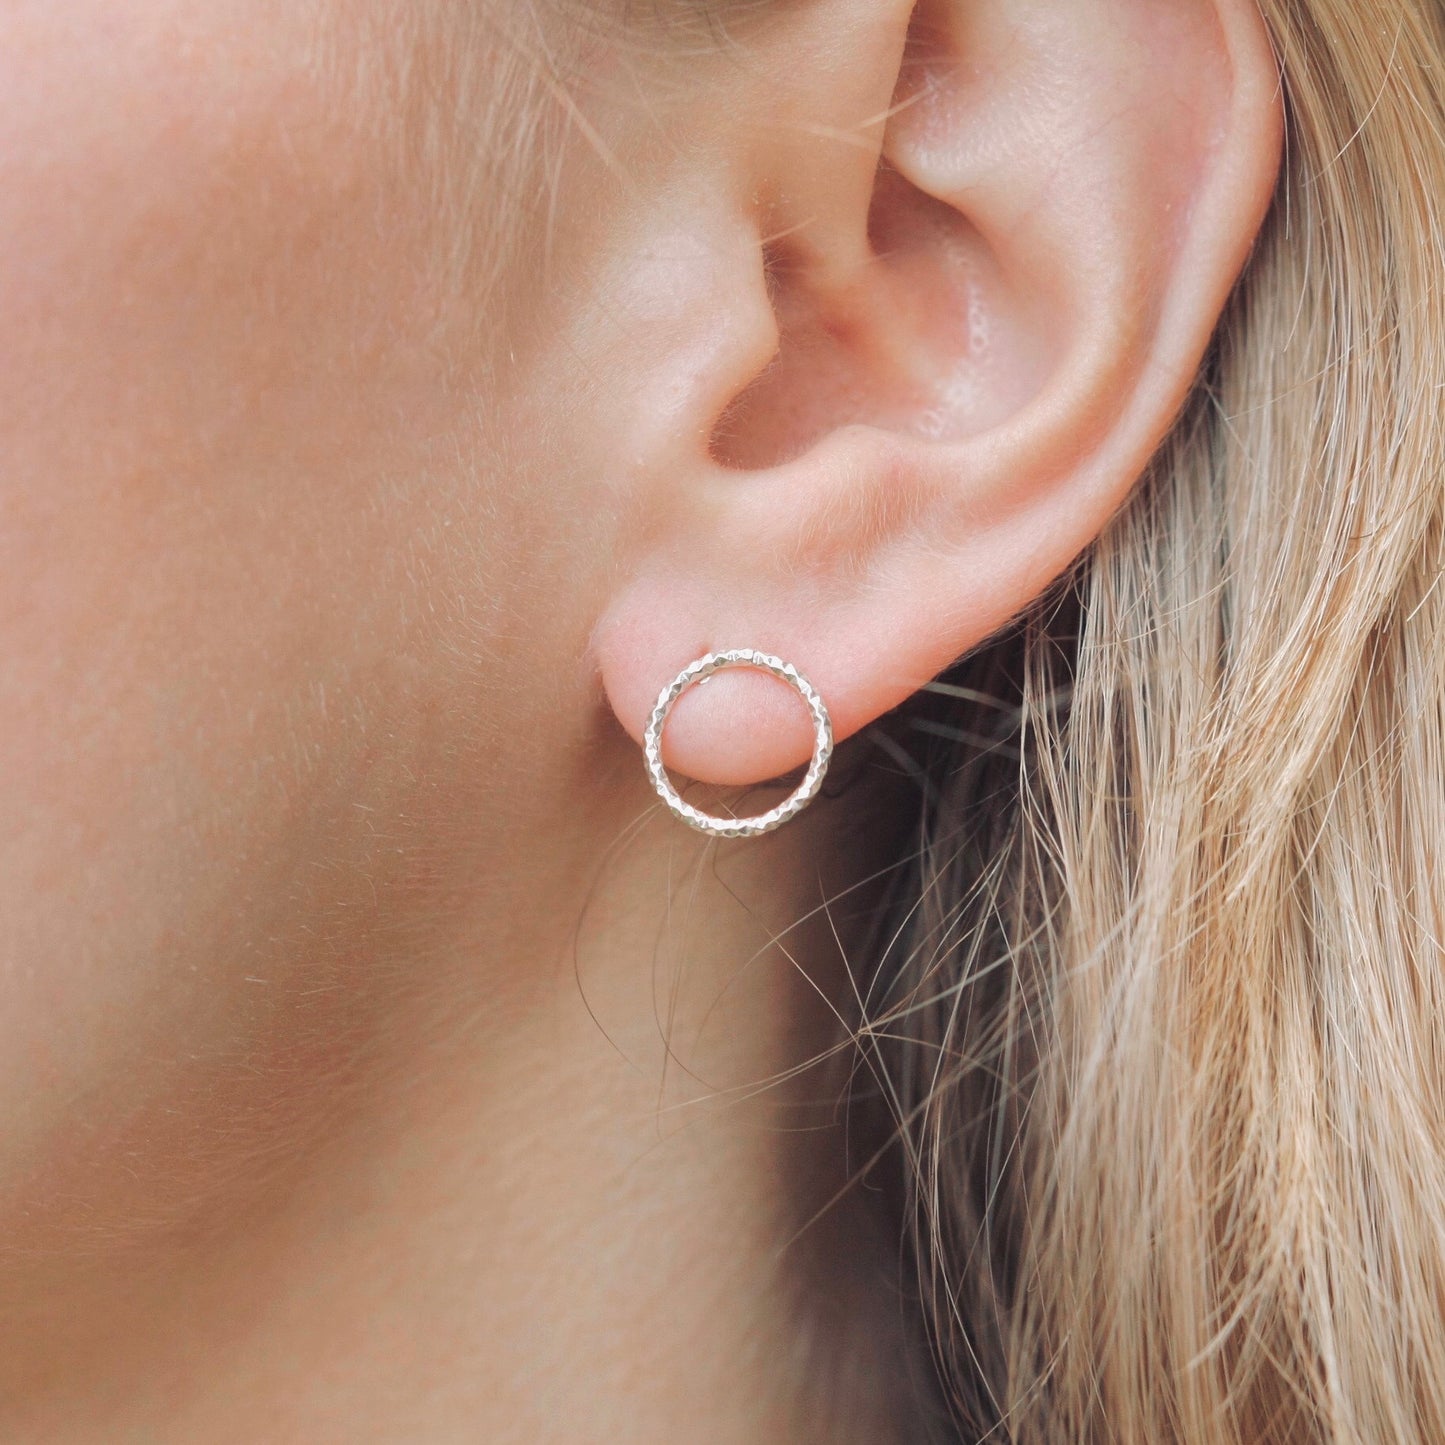 Minimalist Sparkly Sterling Silver Circle Stud Earrings